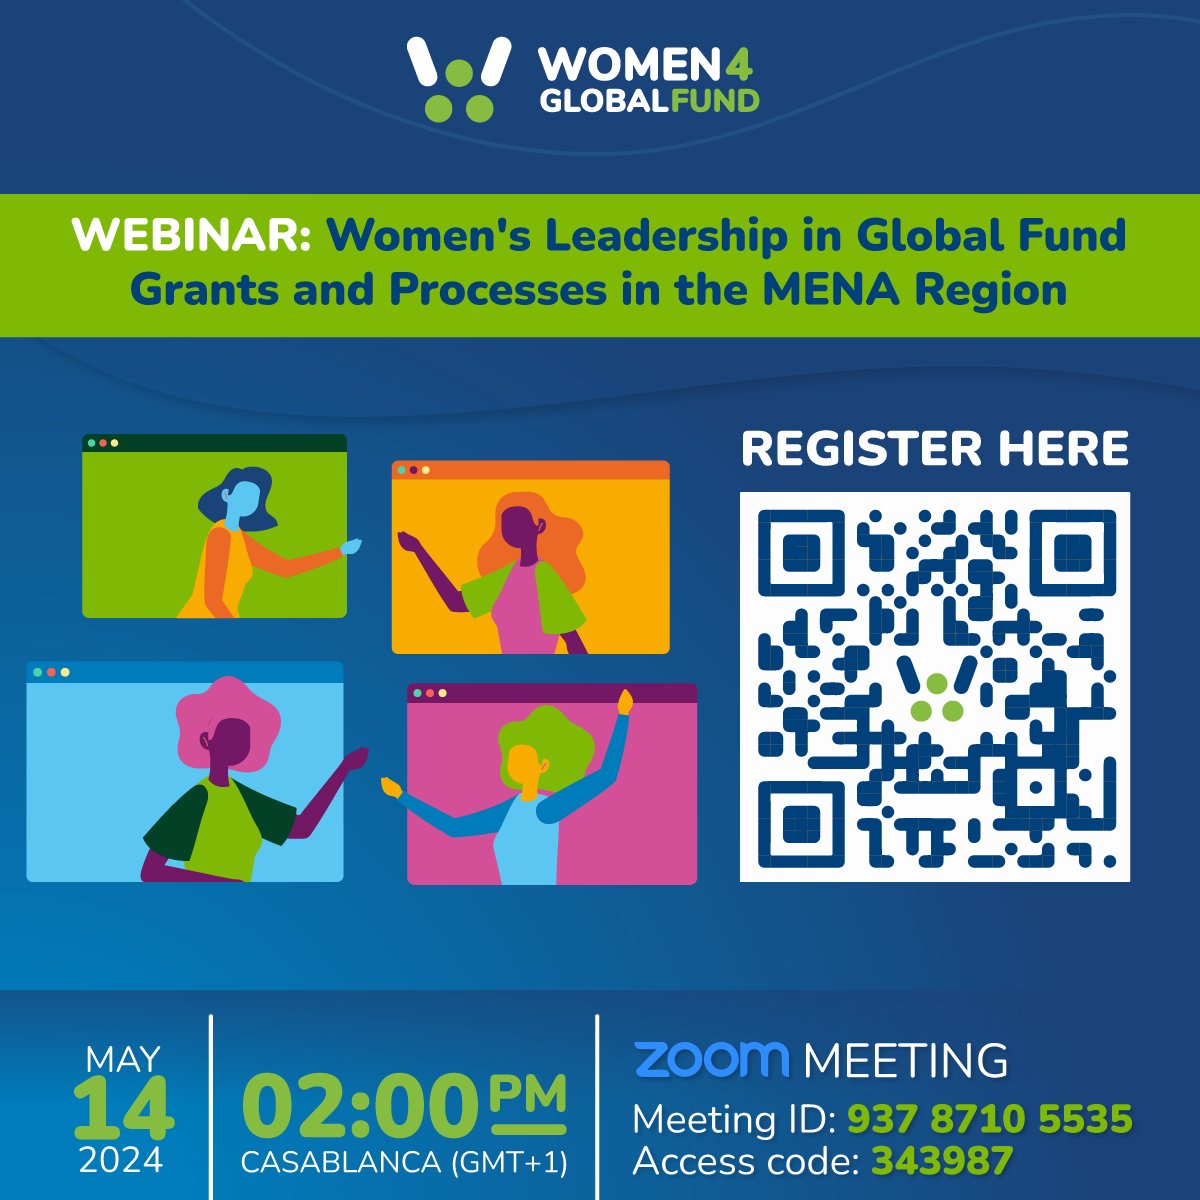 🌟 Ready to lead? 

Join #W4GF webinar on May 14! Connect with women advocates from MENA region, share strategies, and foster networking and collaboration.

Let’s drive change together! 
bit.ly/3QyTTmA 

#fundherhealth